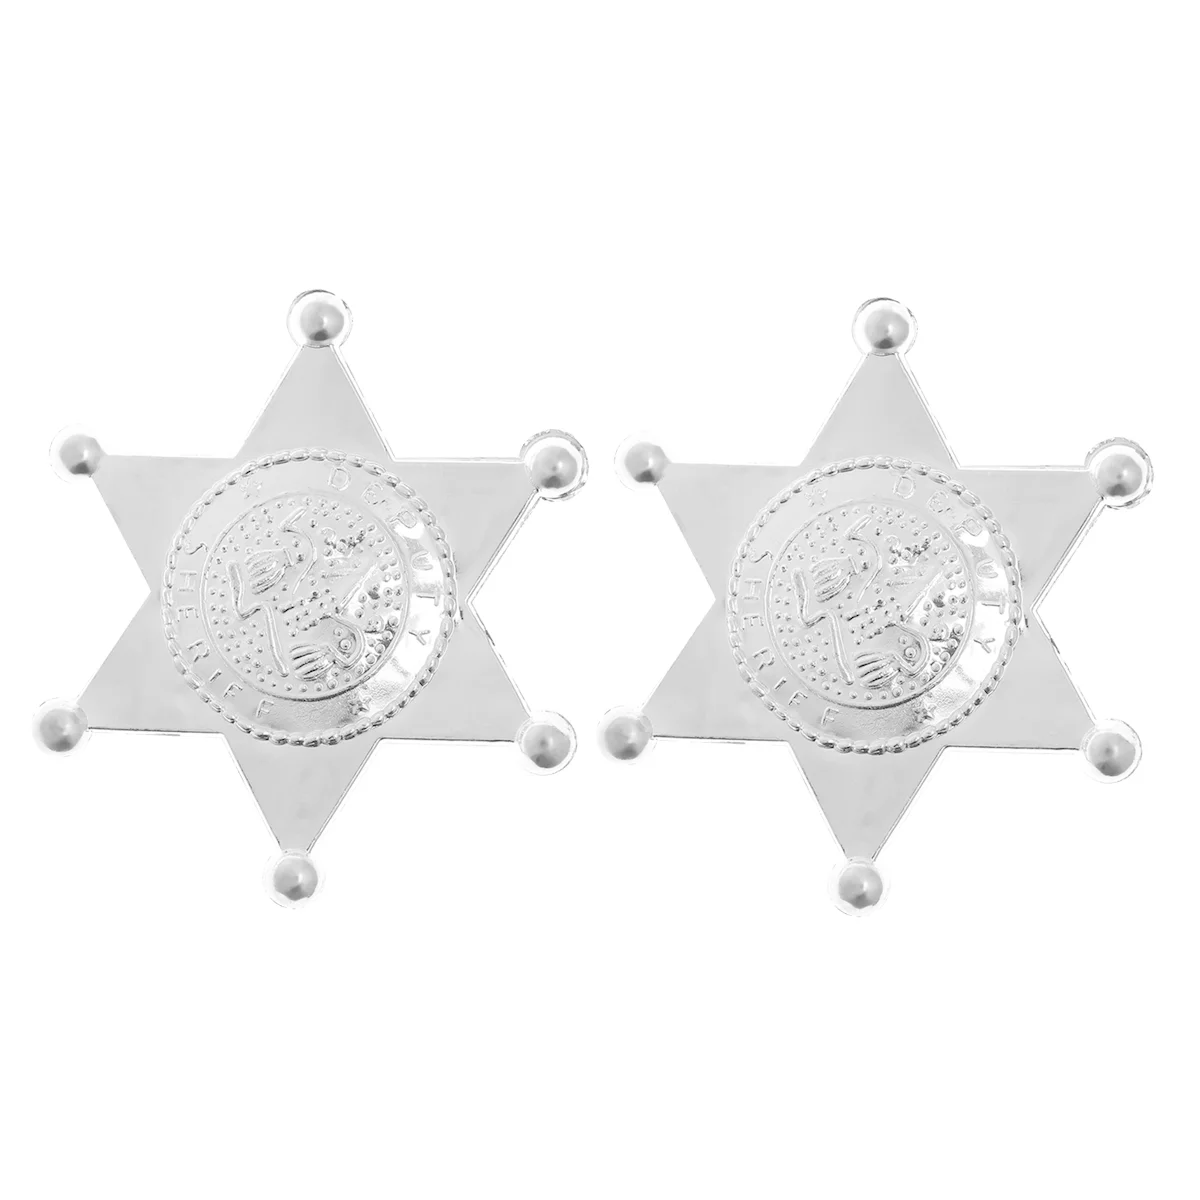 

12pcs Deputy Sheriff Hexagonal Star Badges Personalized Officer Name Tags Brooch for Law Enforcement Officer Costume